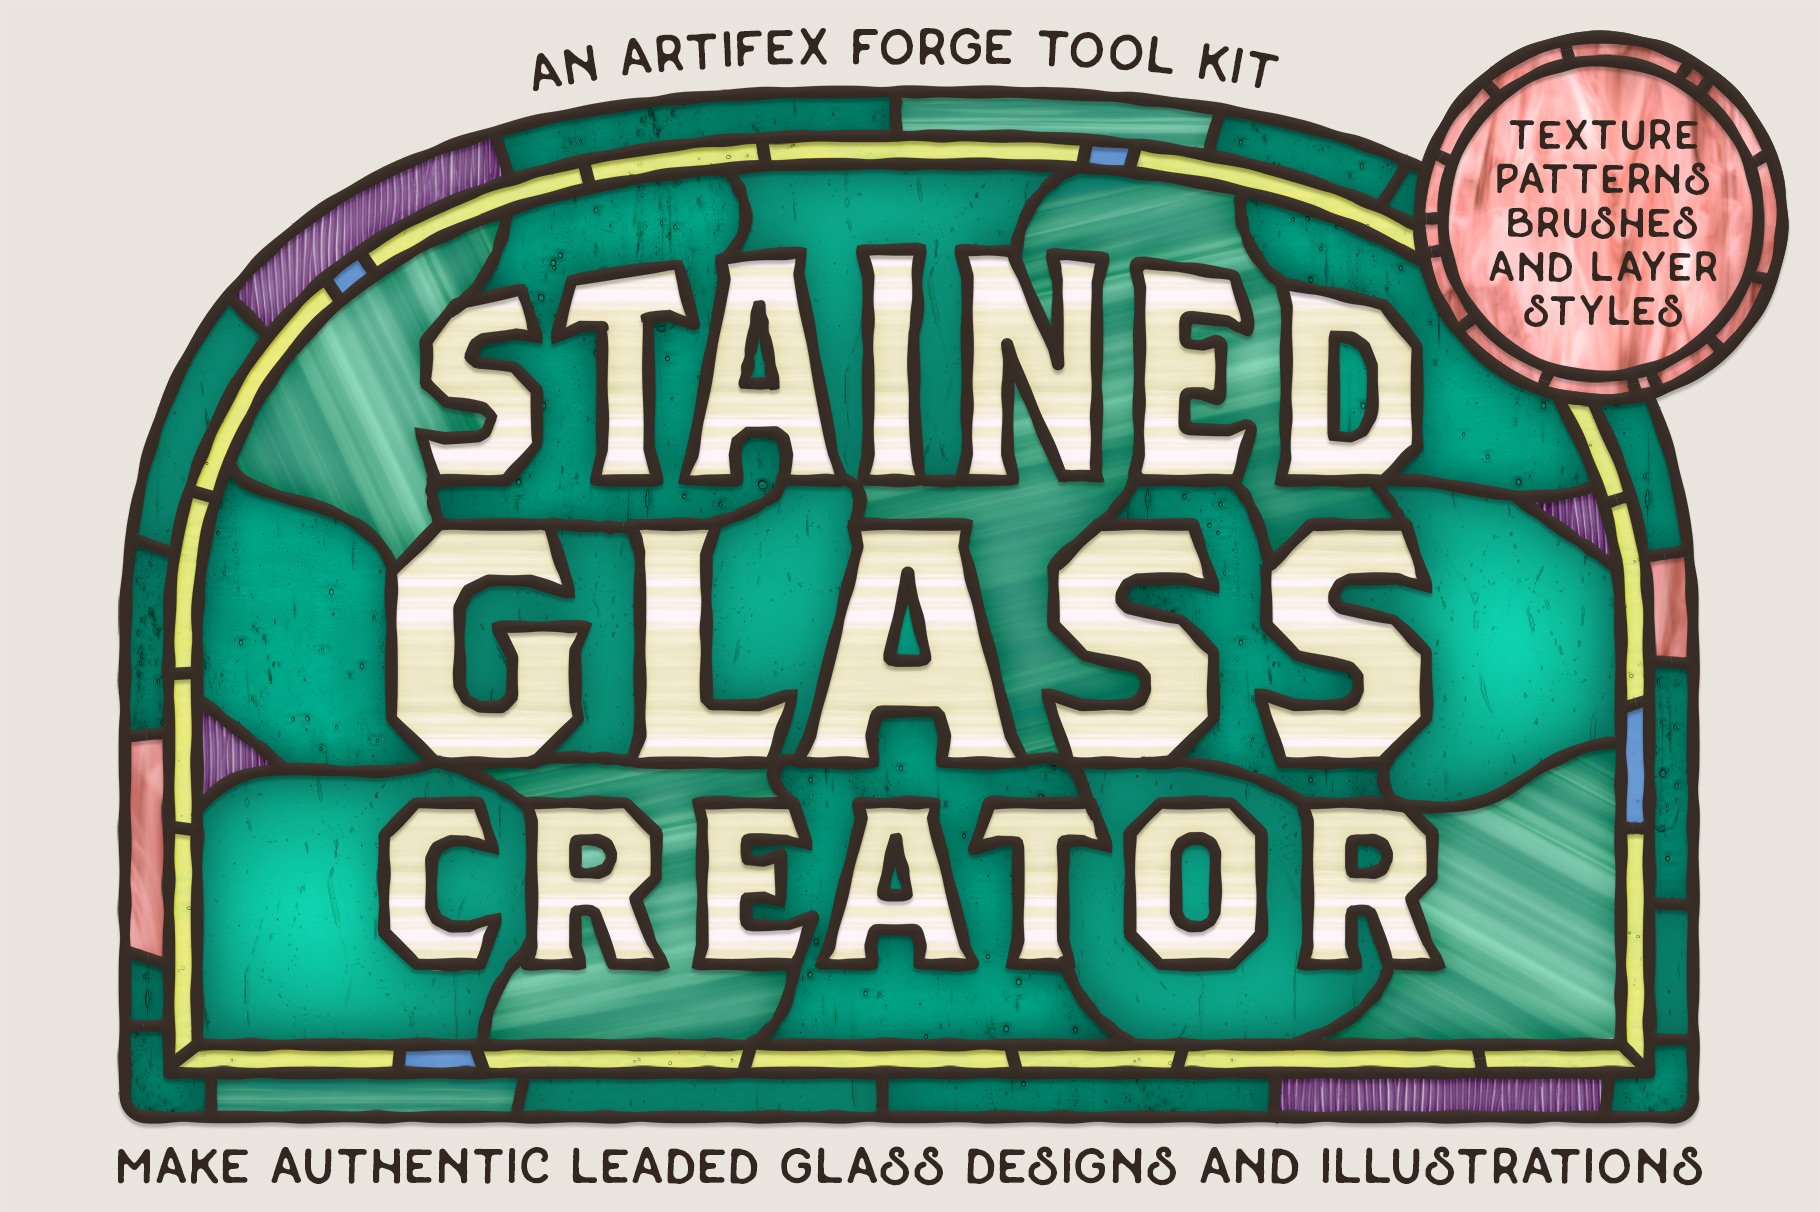 Stained Glass Creatorcover image.